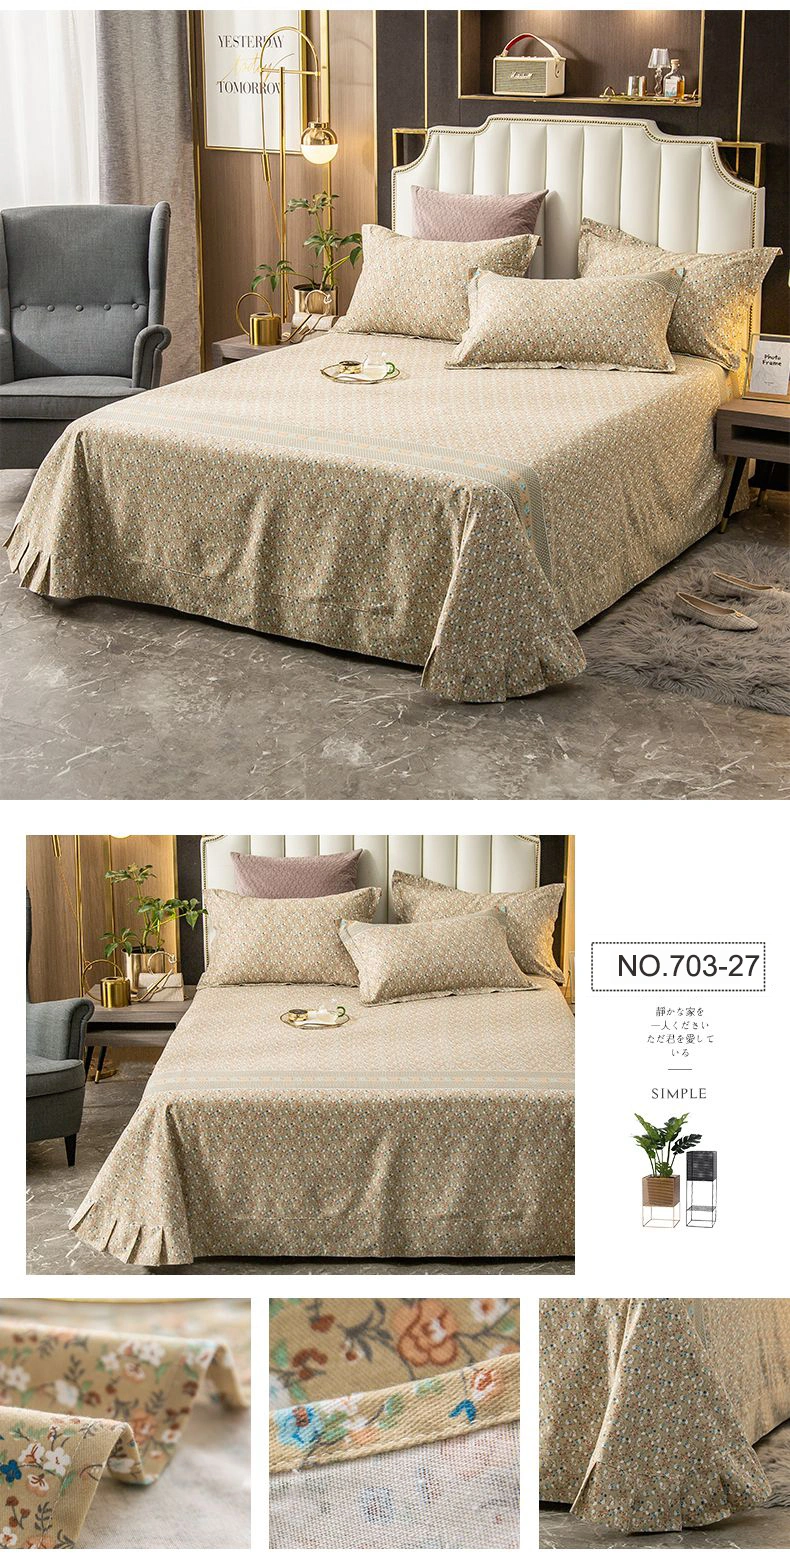 Wholesale Market Bed Sheet Set Cheap Price Comfortable Wrinkle for Twin Bed